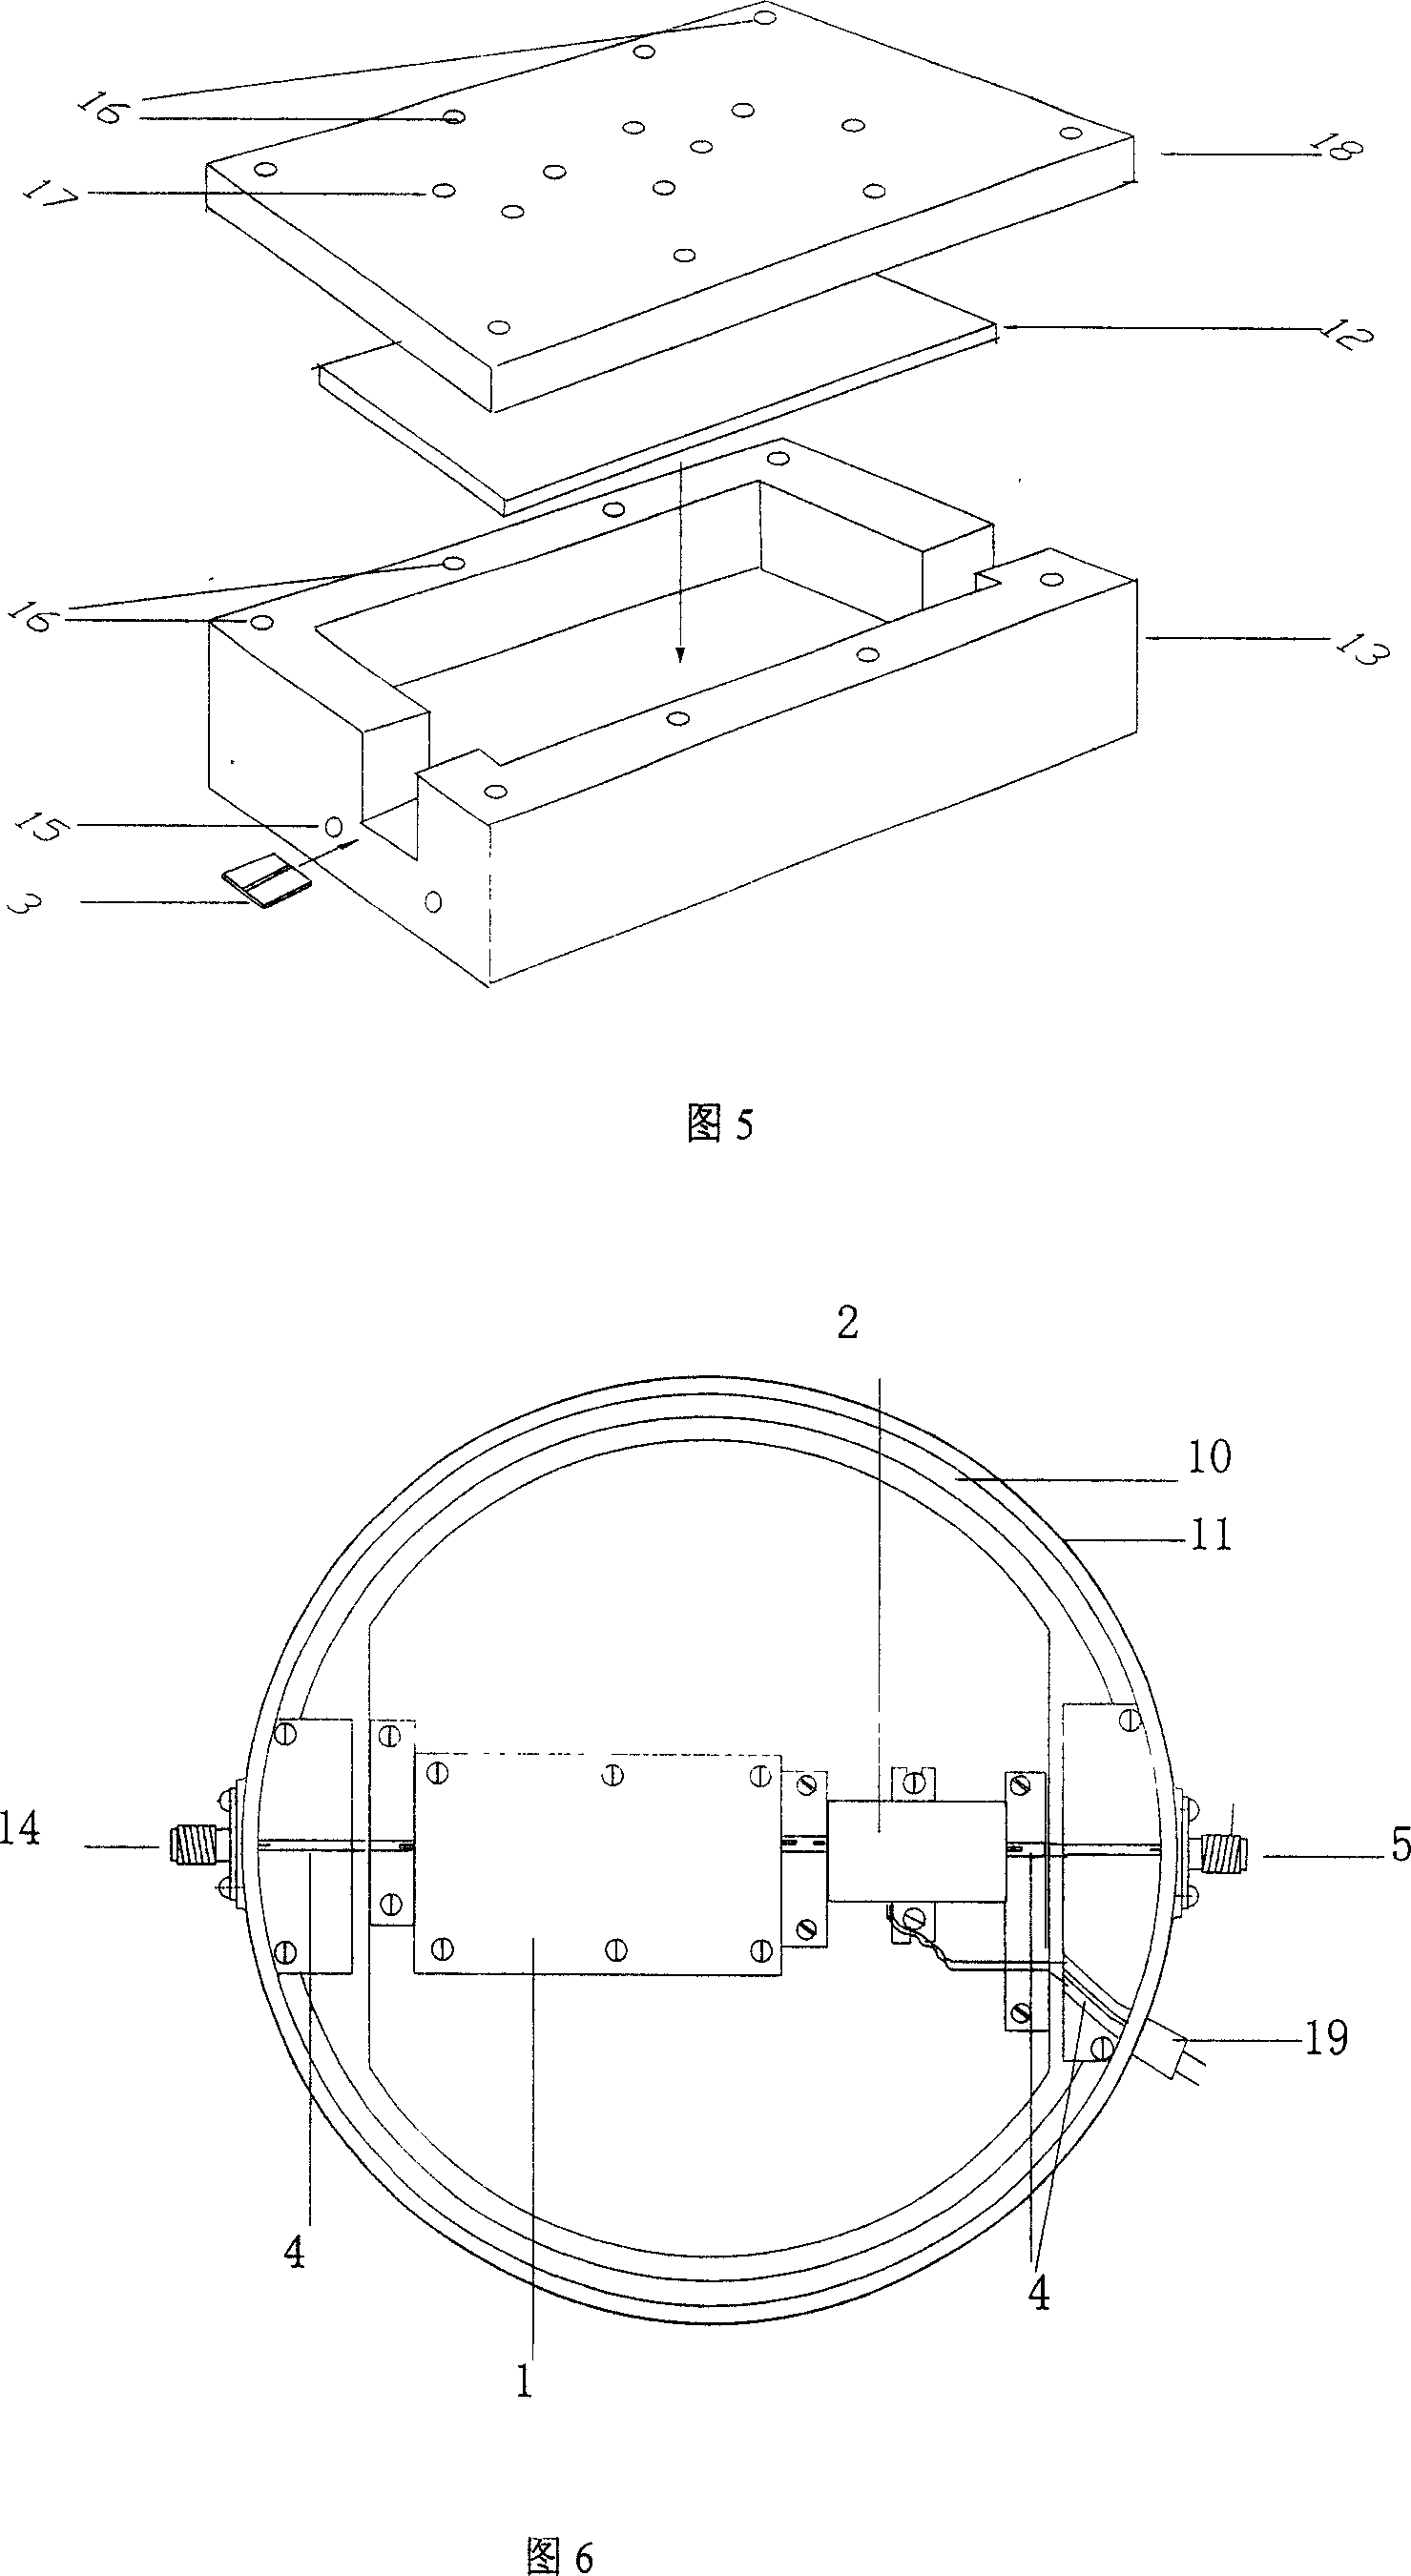 A high heat resistance microwave sub-system for weather radar receiver front end